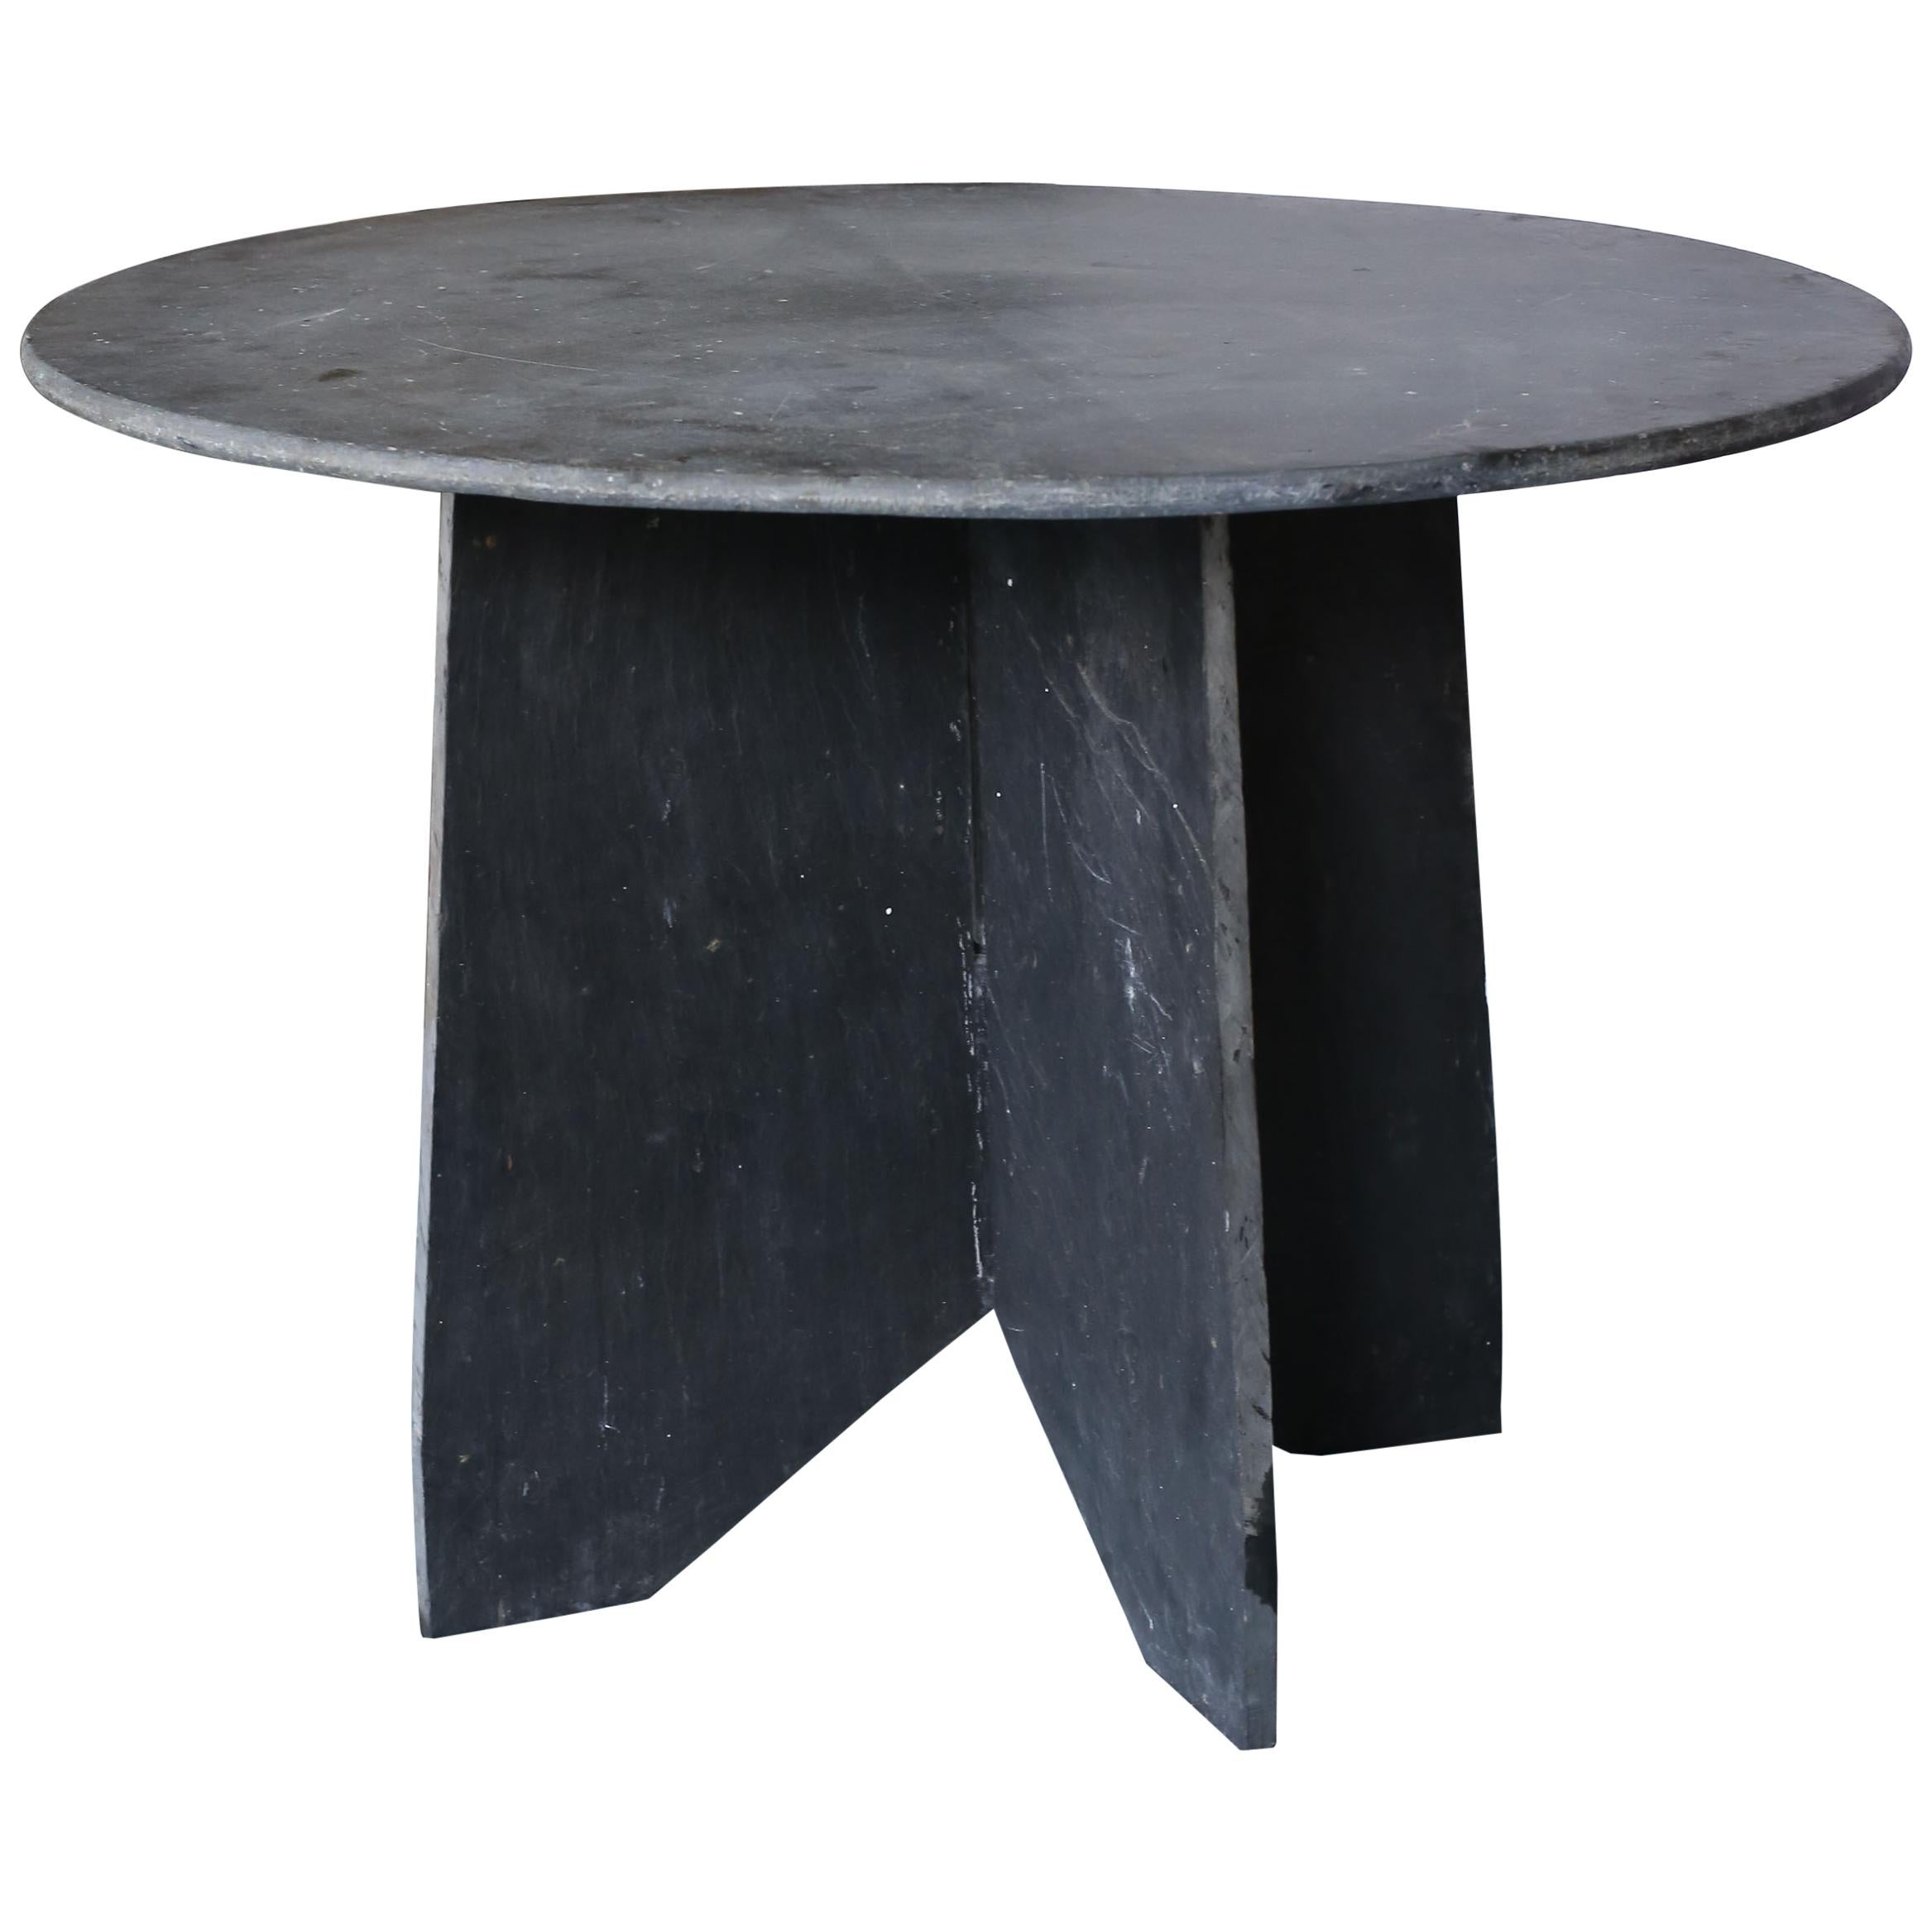 Round Slate Side Table or Center Table